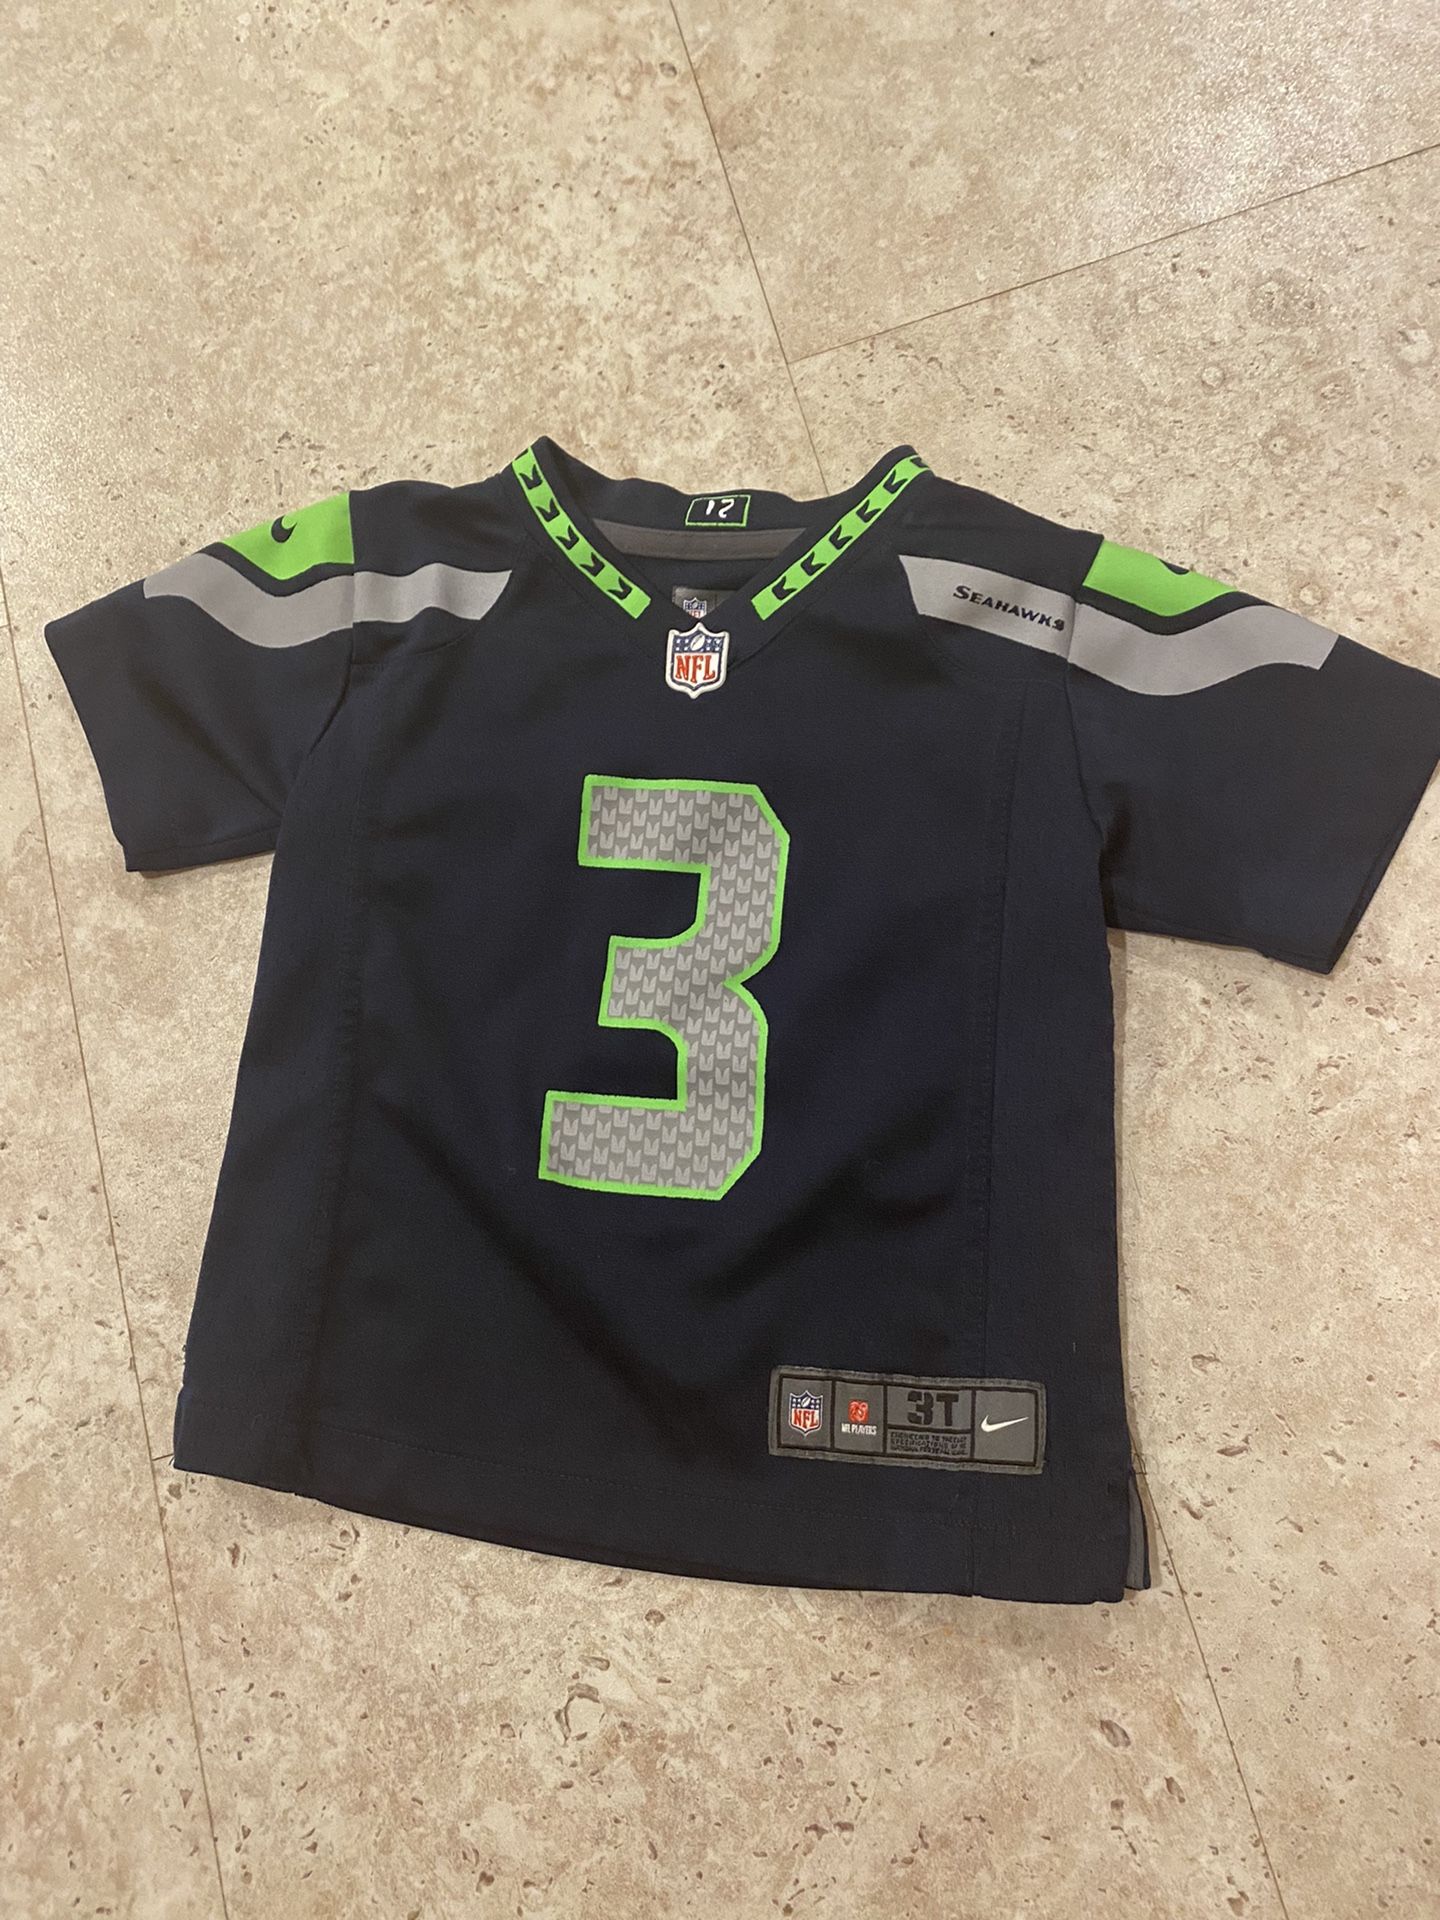 *** PENDING **** 3T Seahawks Jersey And T-shirt